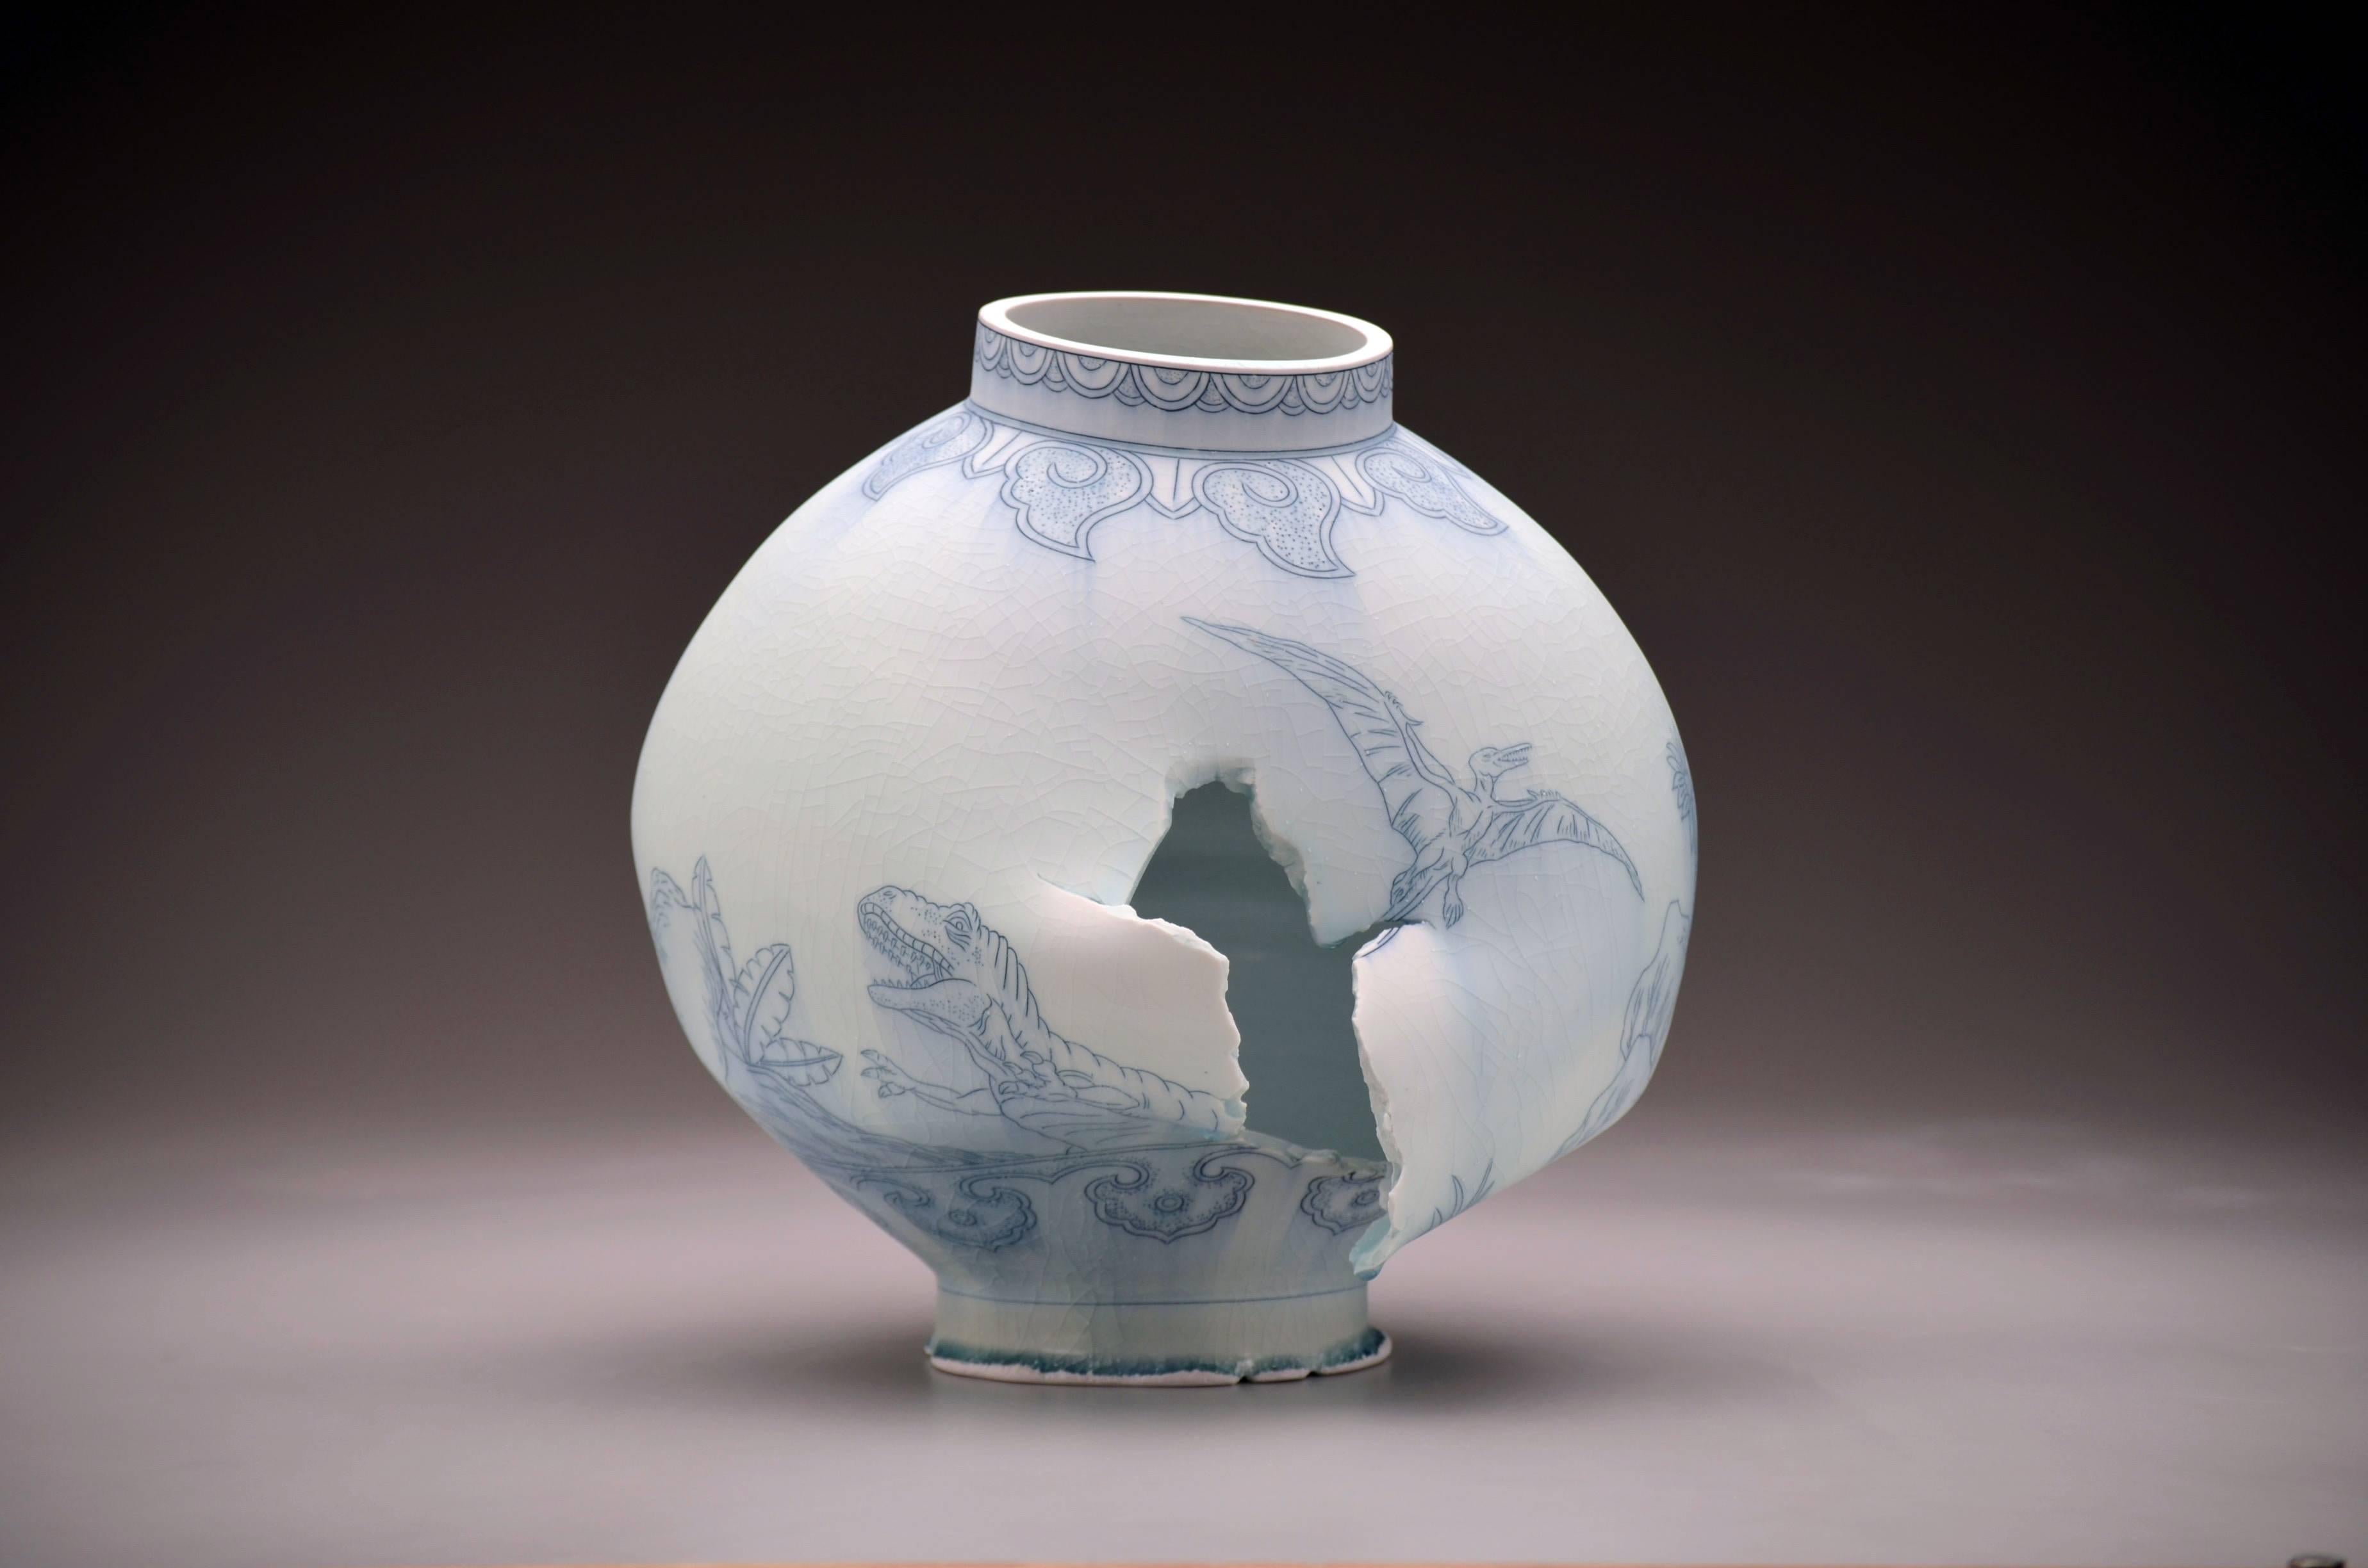 Moon Jar with Dinosaurs by Steven Young Lee, Deconstructed Porcelain Sculpture 1